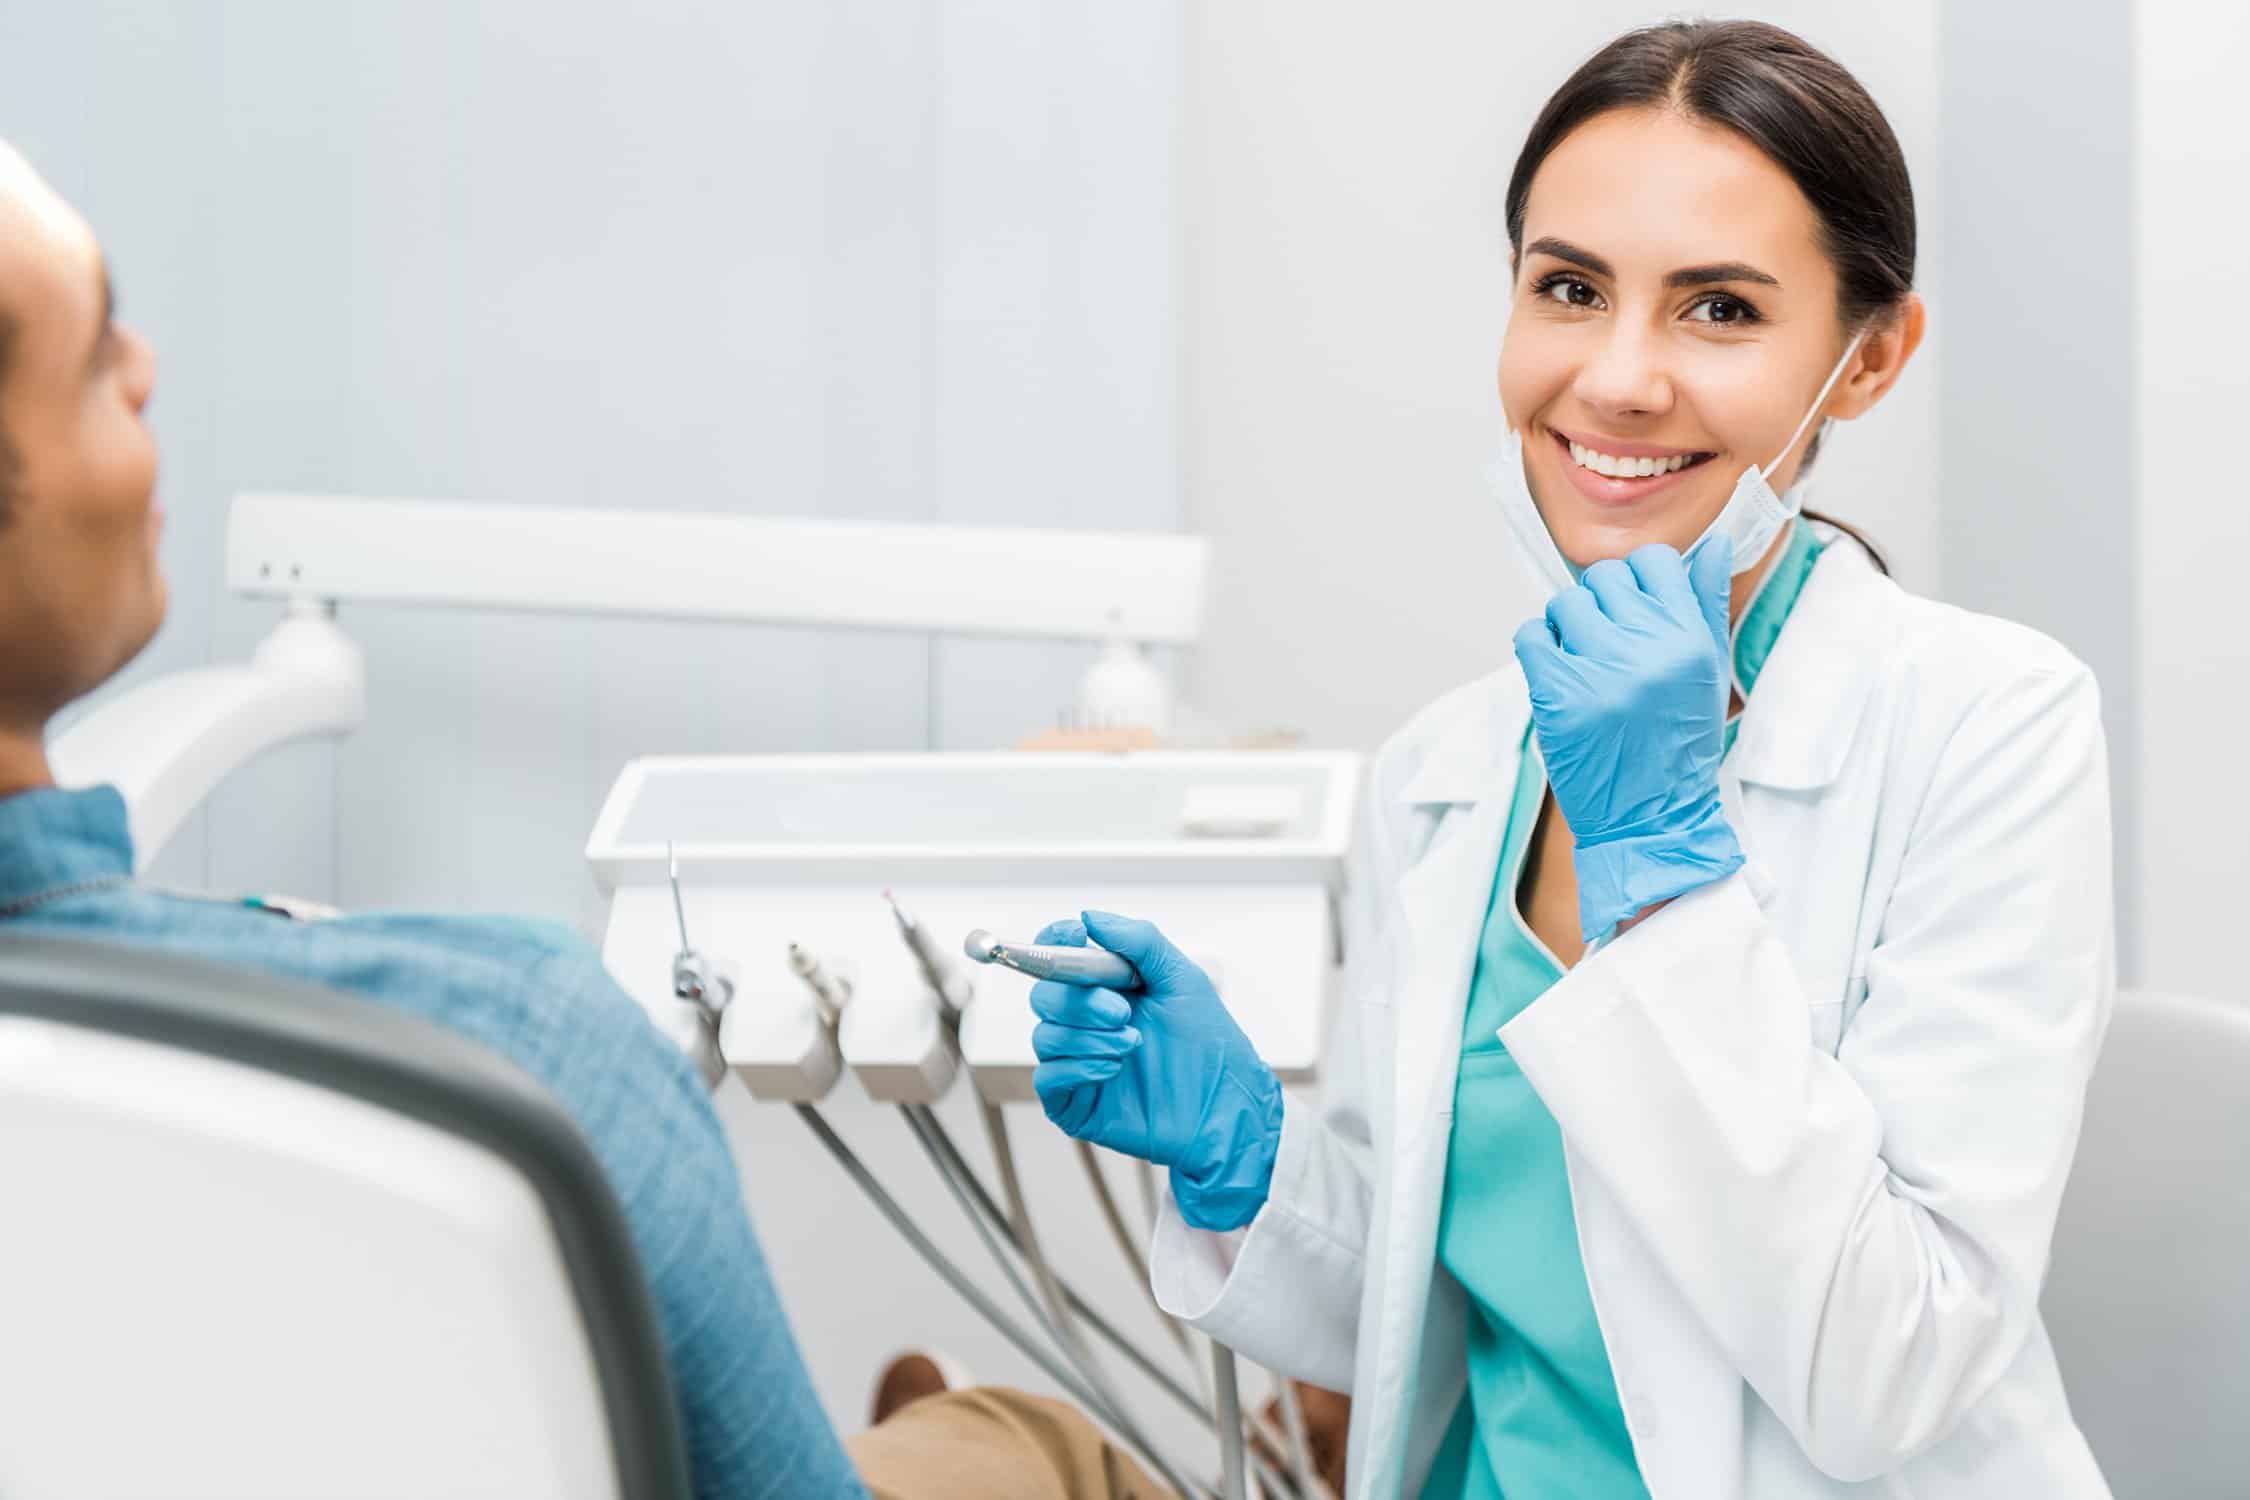 How to choose a good dentist? -